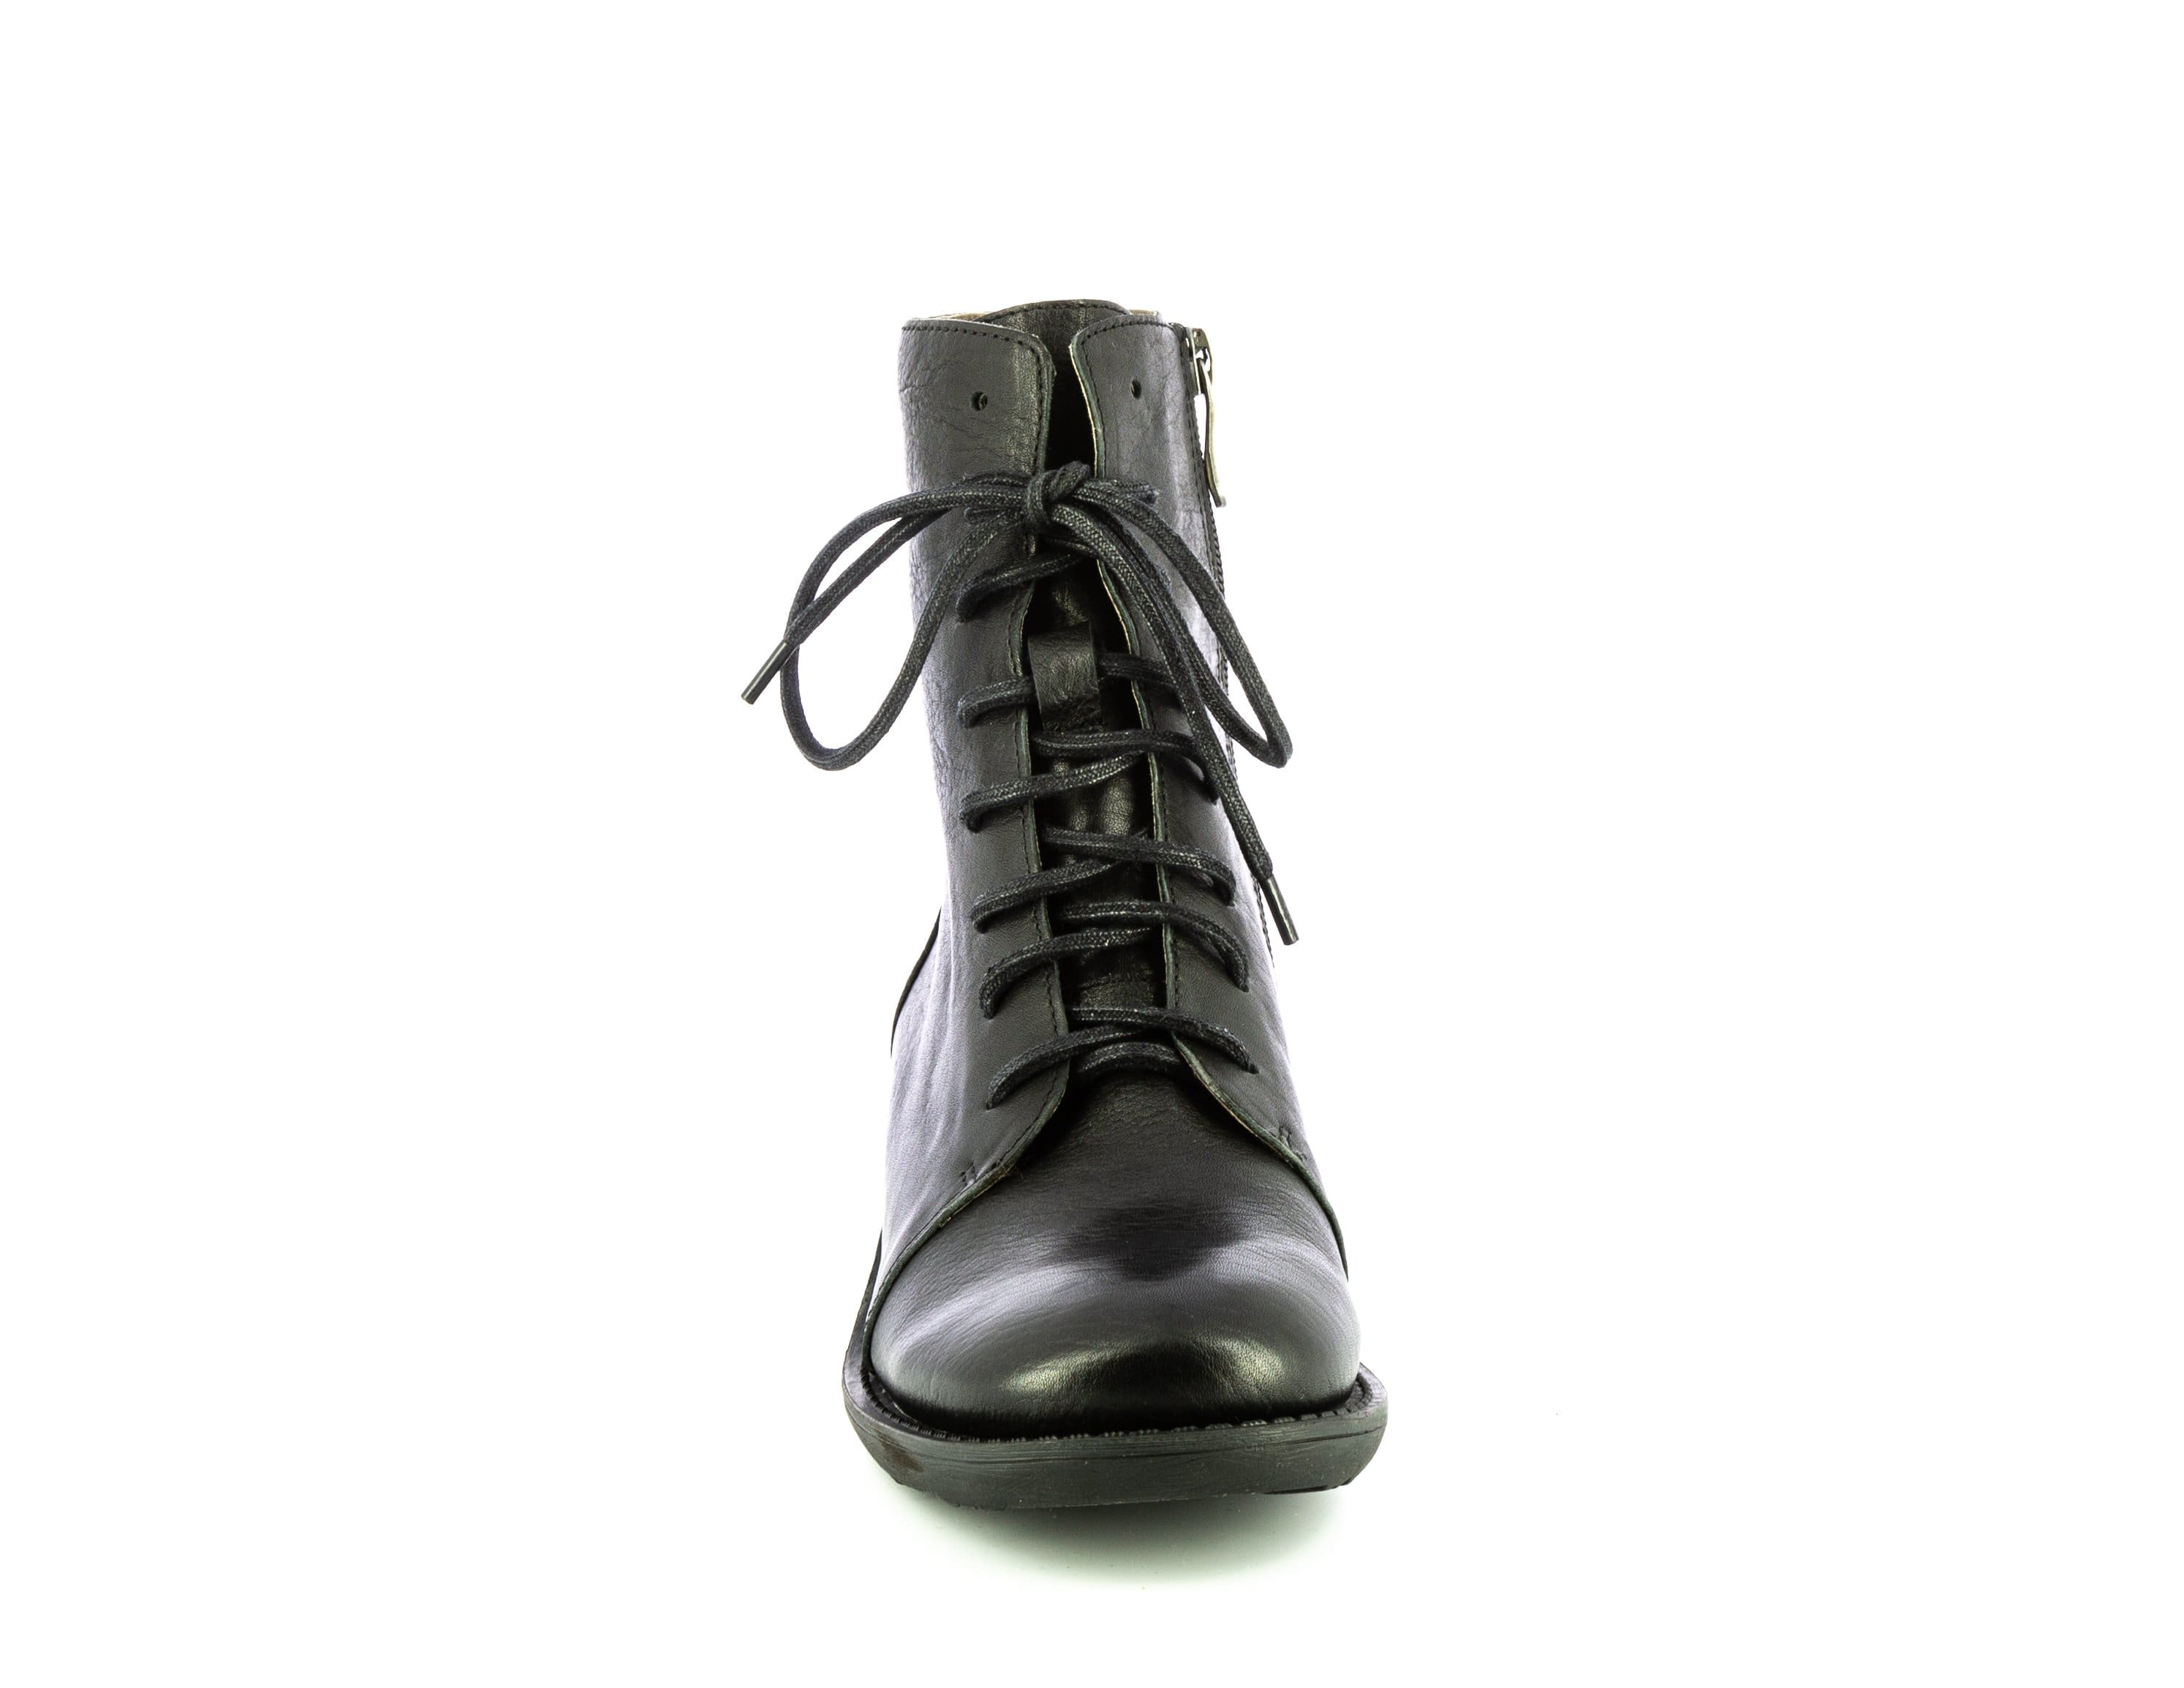 Chaussure IDCALIAO 03 - Boots